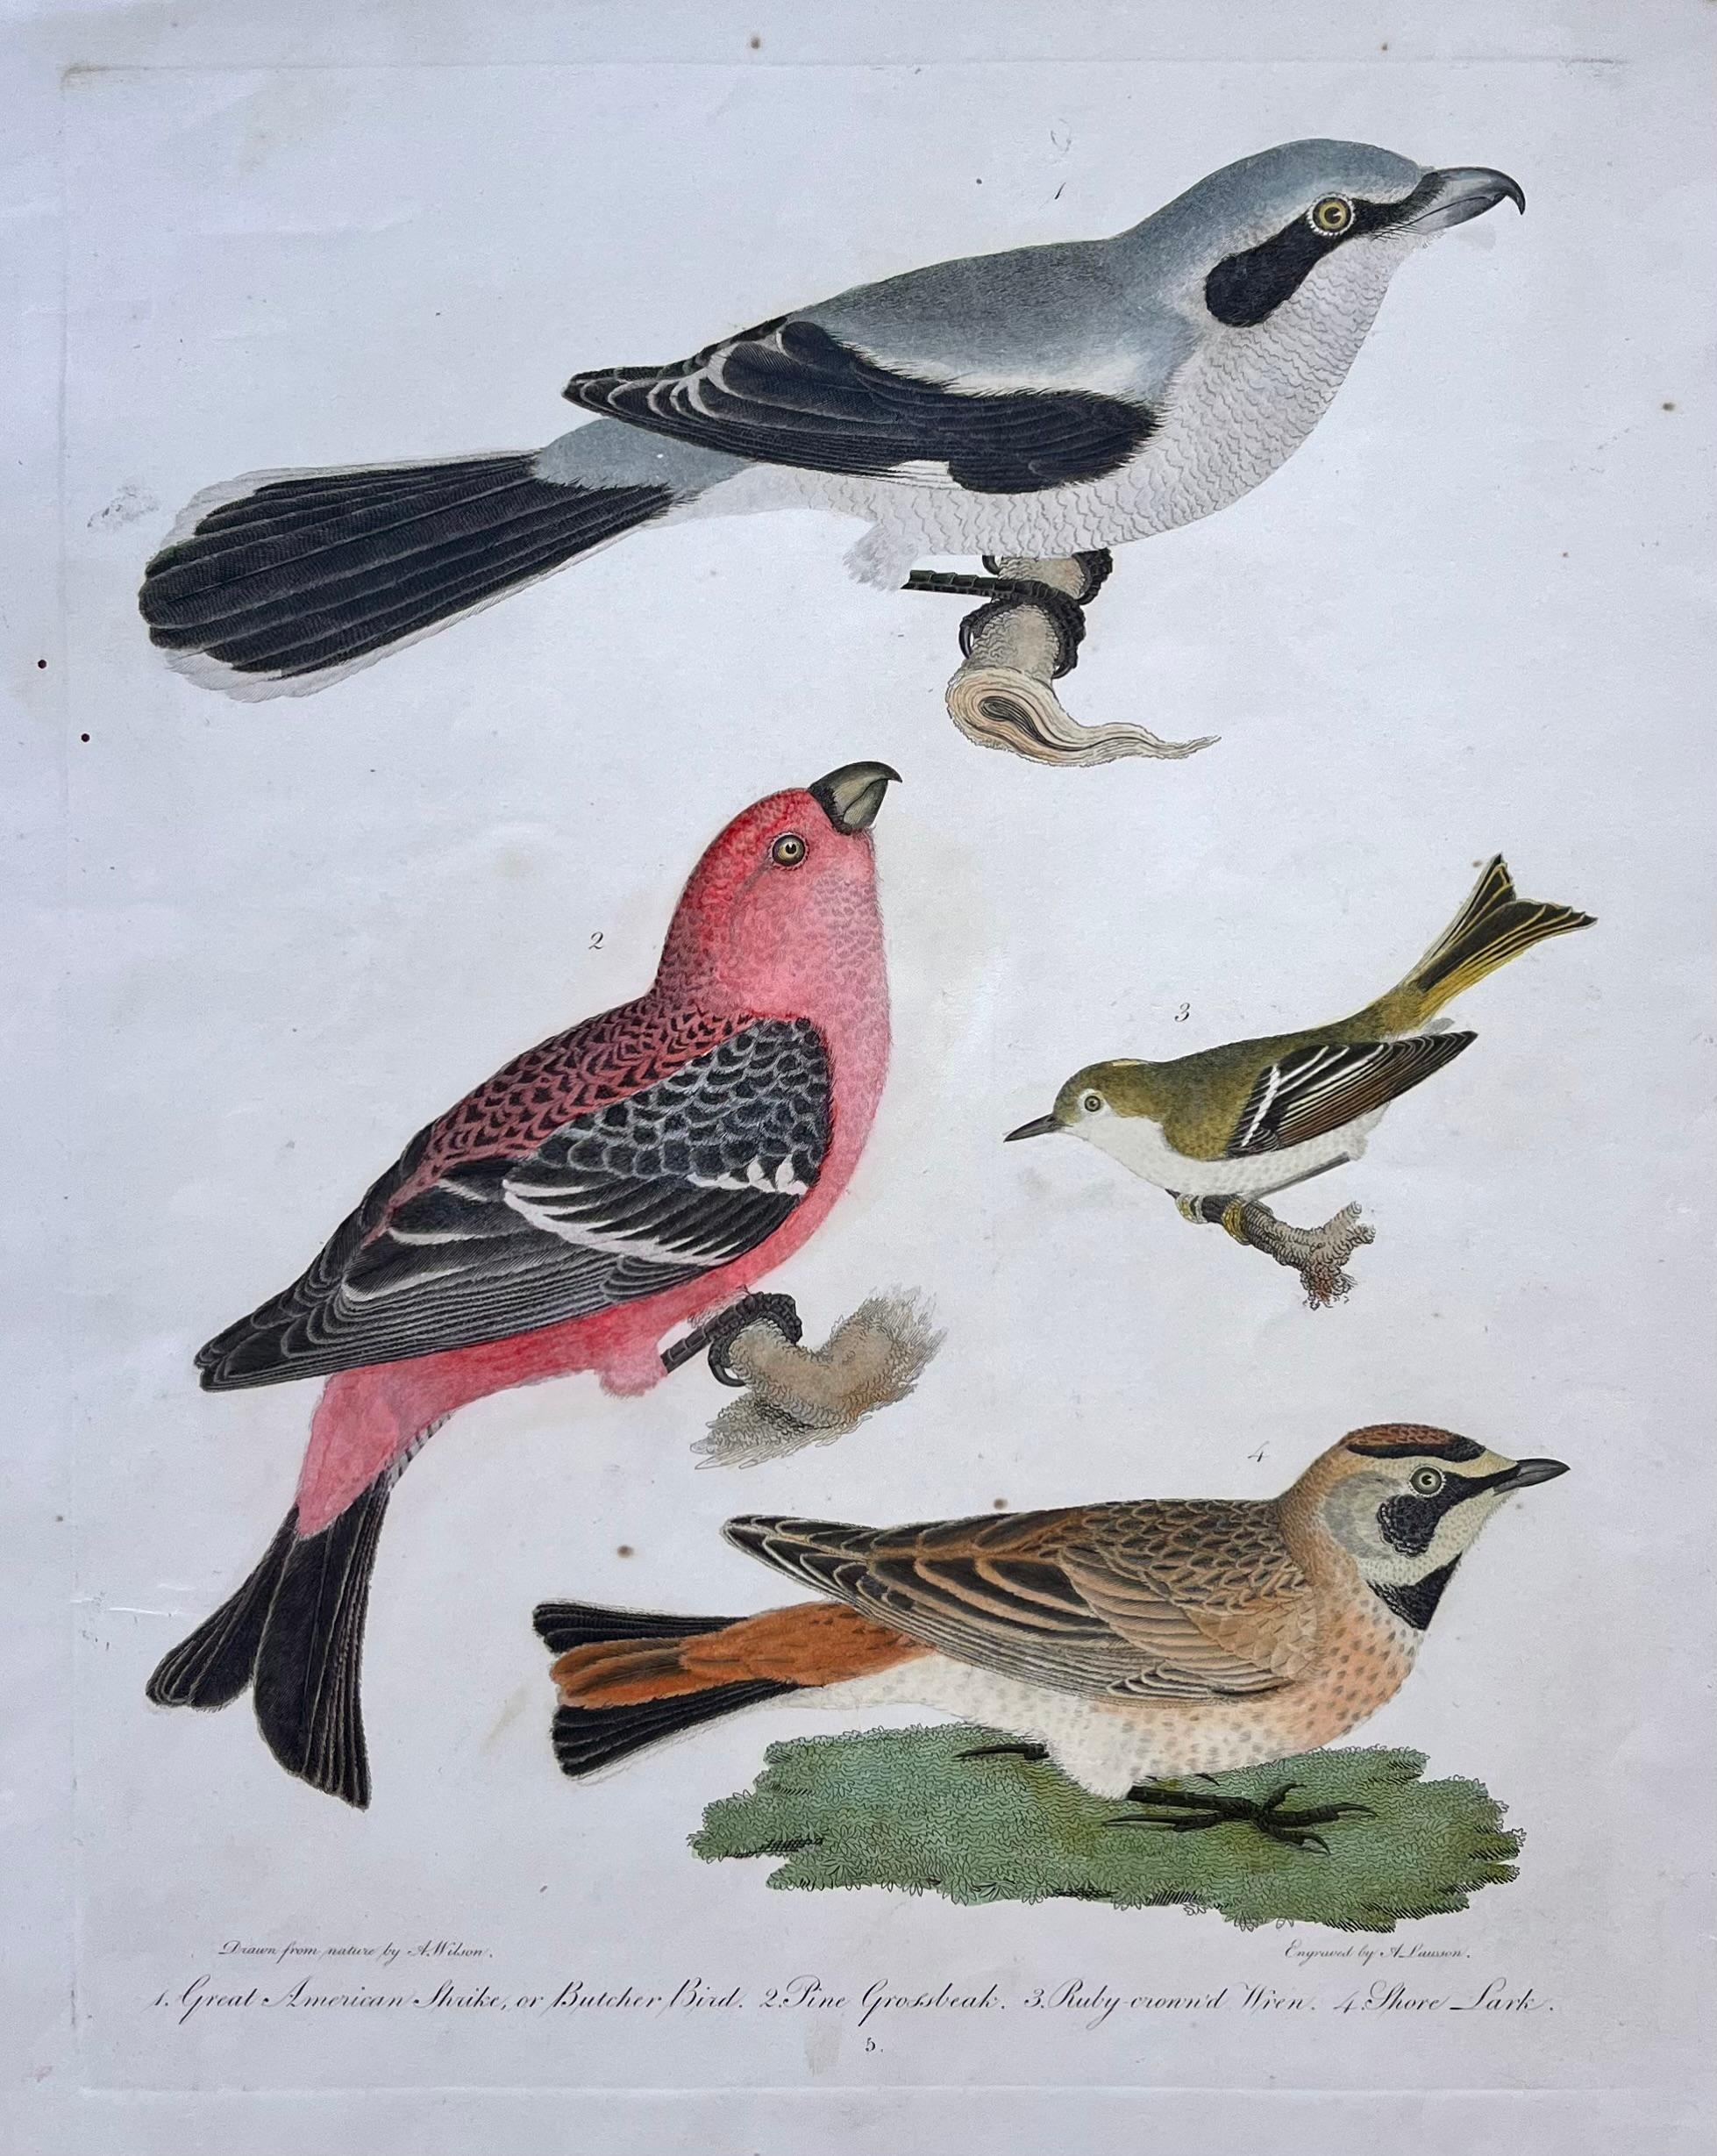 1. Great American Shrike, or Butcher Bird. 2. Pine Grosbeak. 3. Ruby-crowned Wren. 4. Shore Lark.

Subscript: Lower Left: Drawn from Nature by A. Wilson.; Lower Center: 5.; Lower Right: Engraved by A. Lauson 

Artist: Alexander Wilson

Engraver: A.